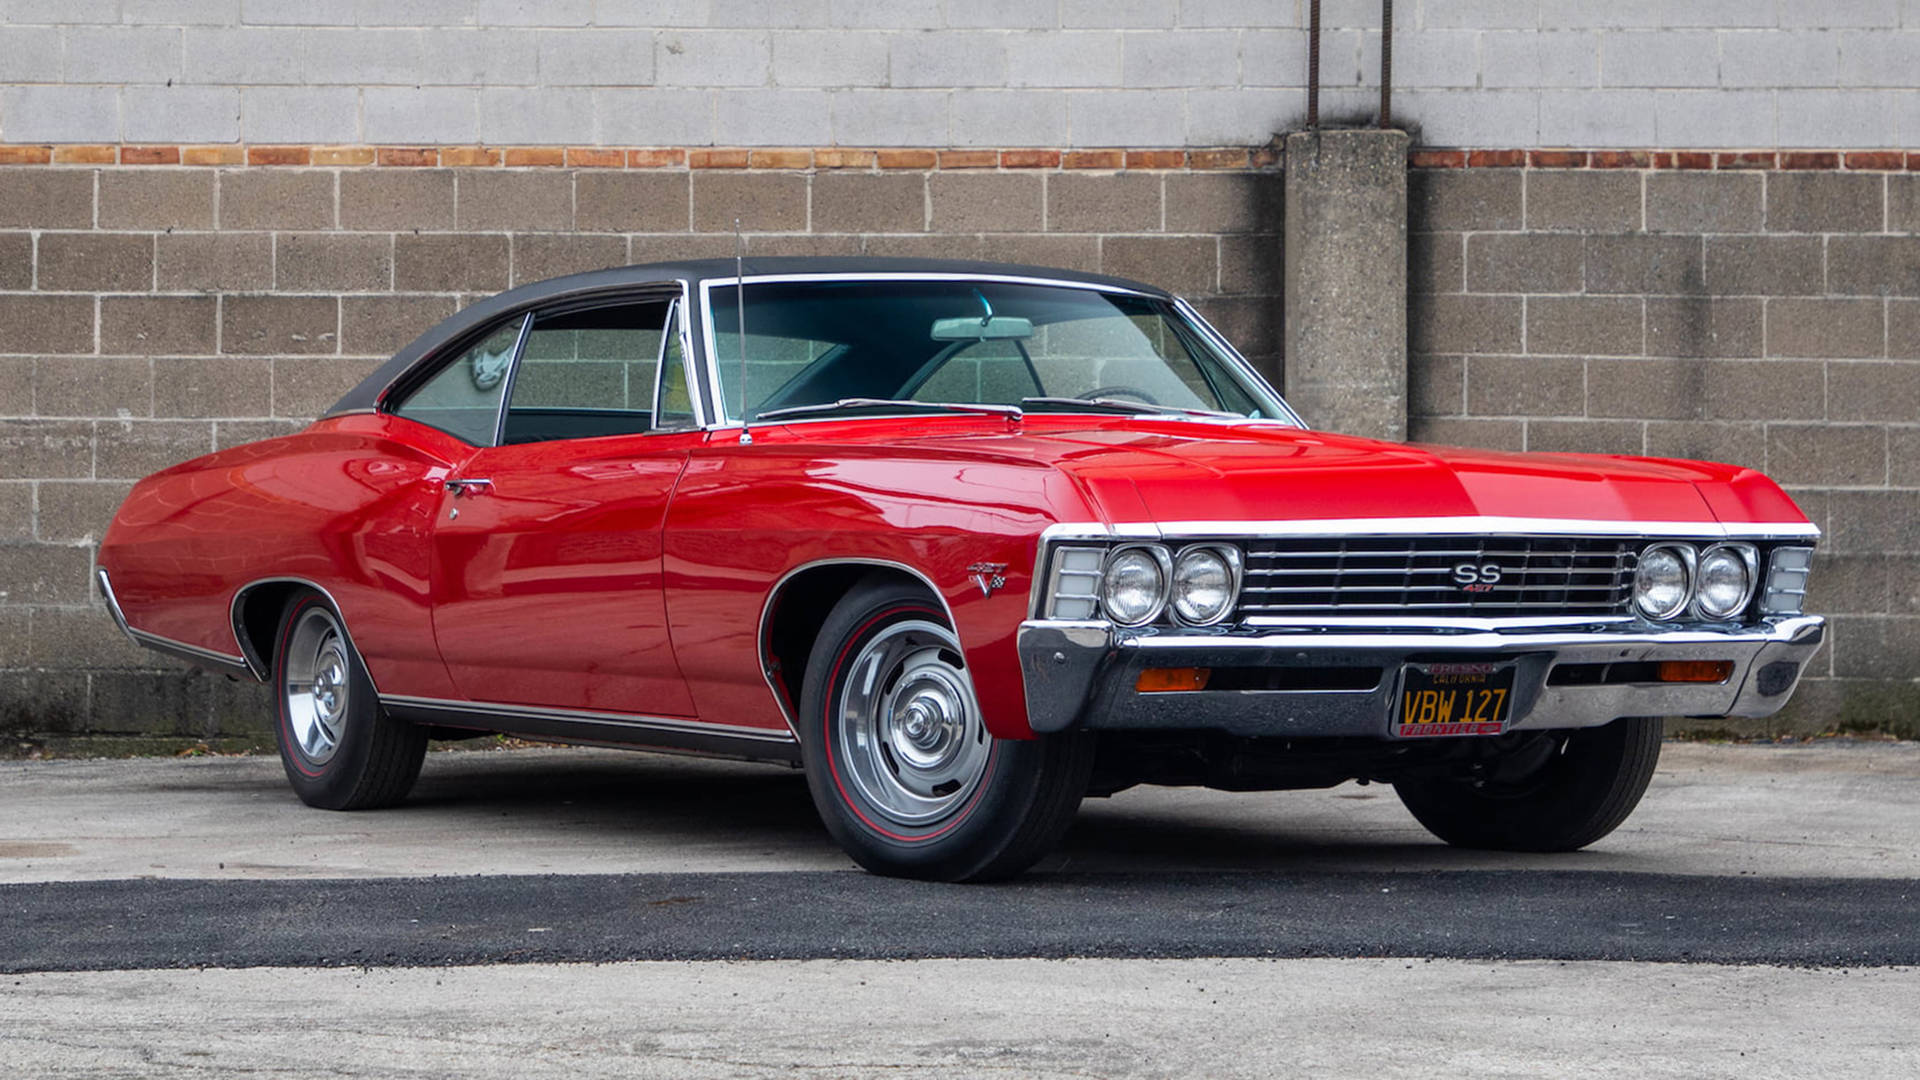 Classic Perfection - Red 1967 Chevrolet Impala